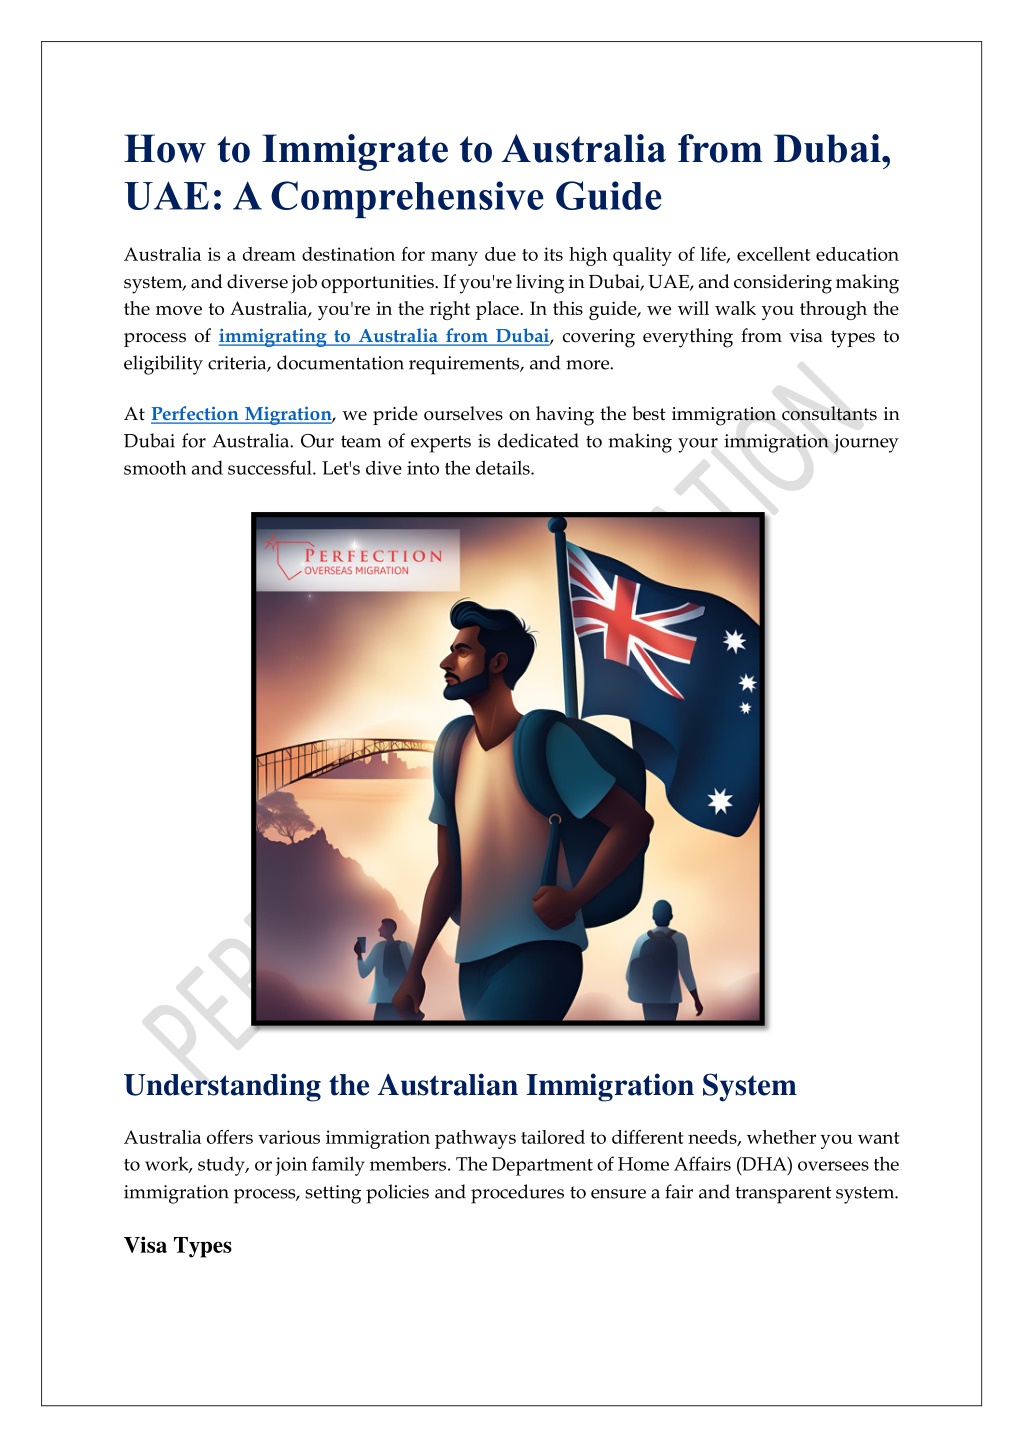 how to immigrate to australia from dubai l.w